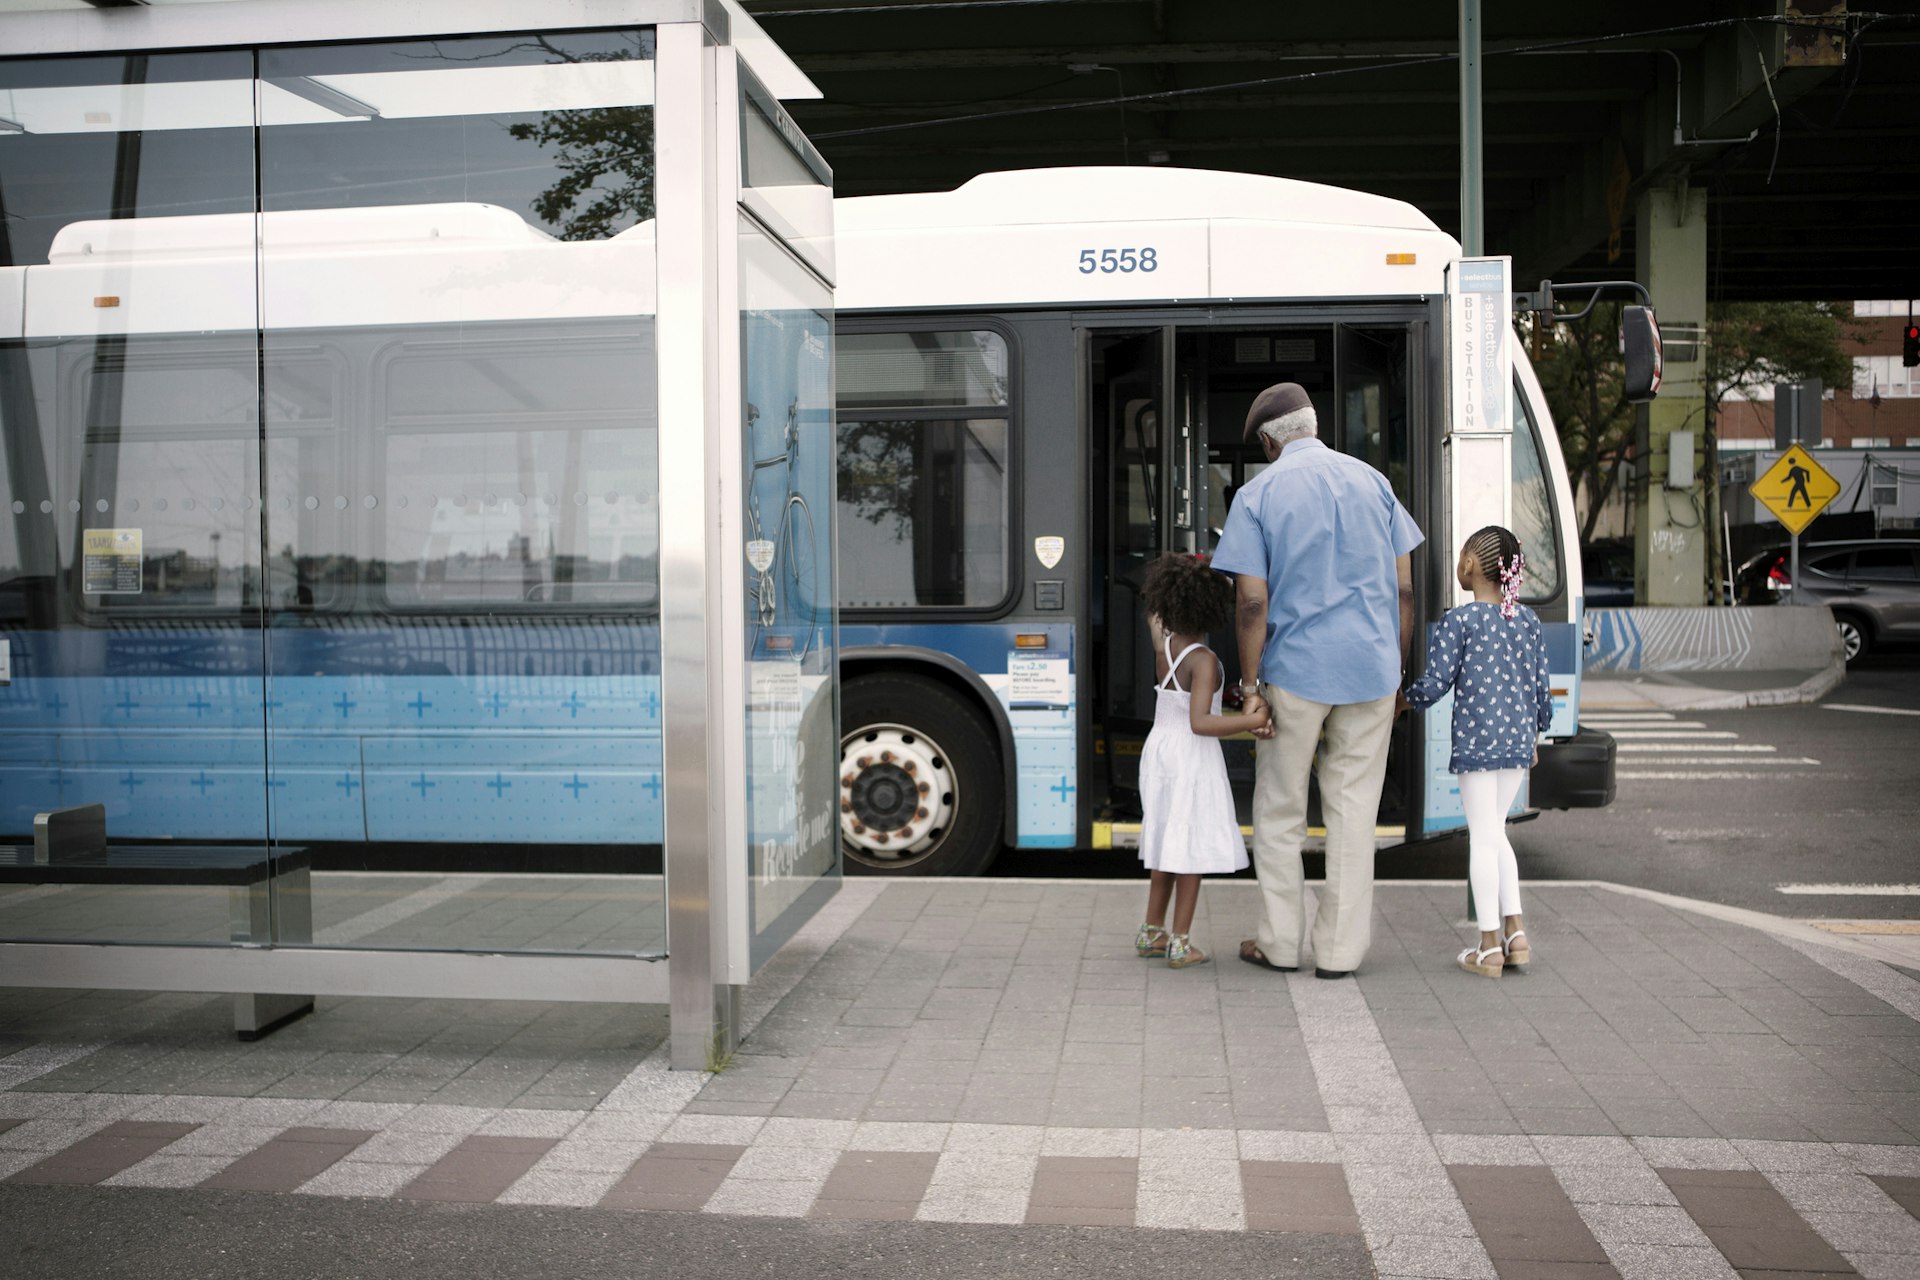 A grandfather and his two grandkids holding hands and boarding a city bus together 